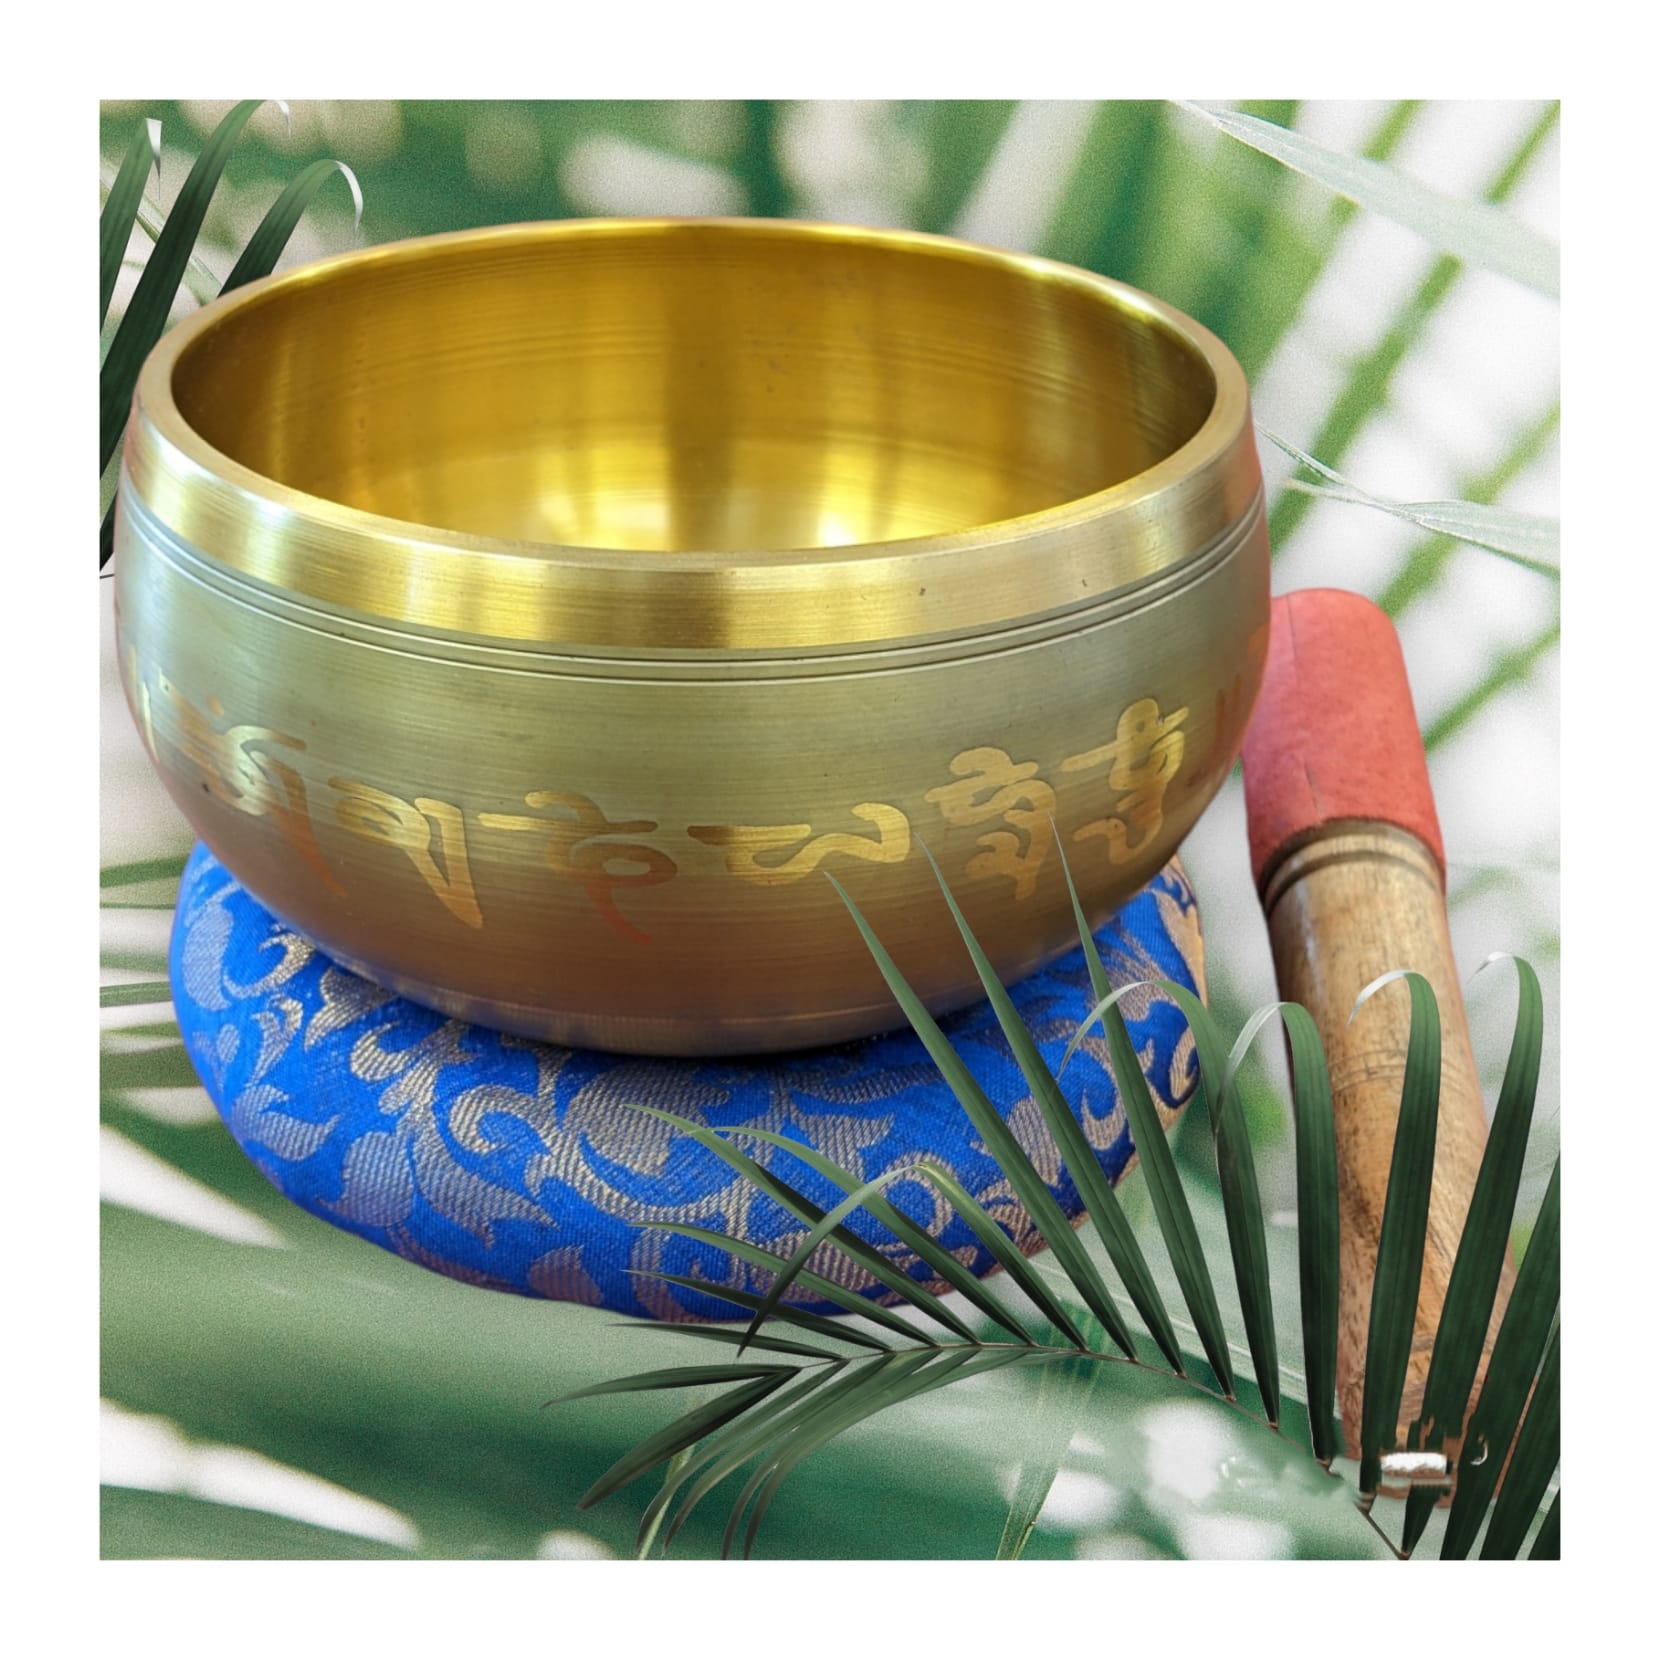 Image of a 6 inch Tibetan Singing bowl with a wooden mallet placed on a Cushion Cover